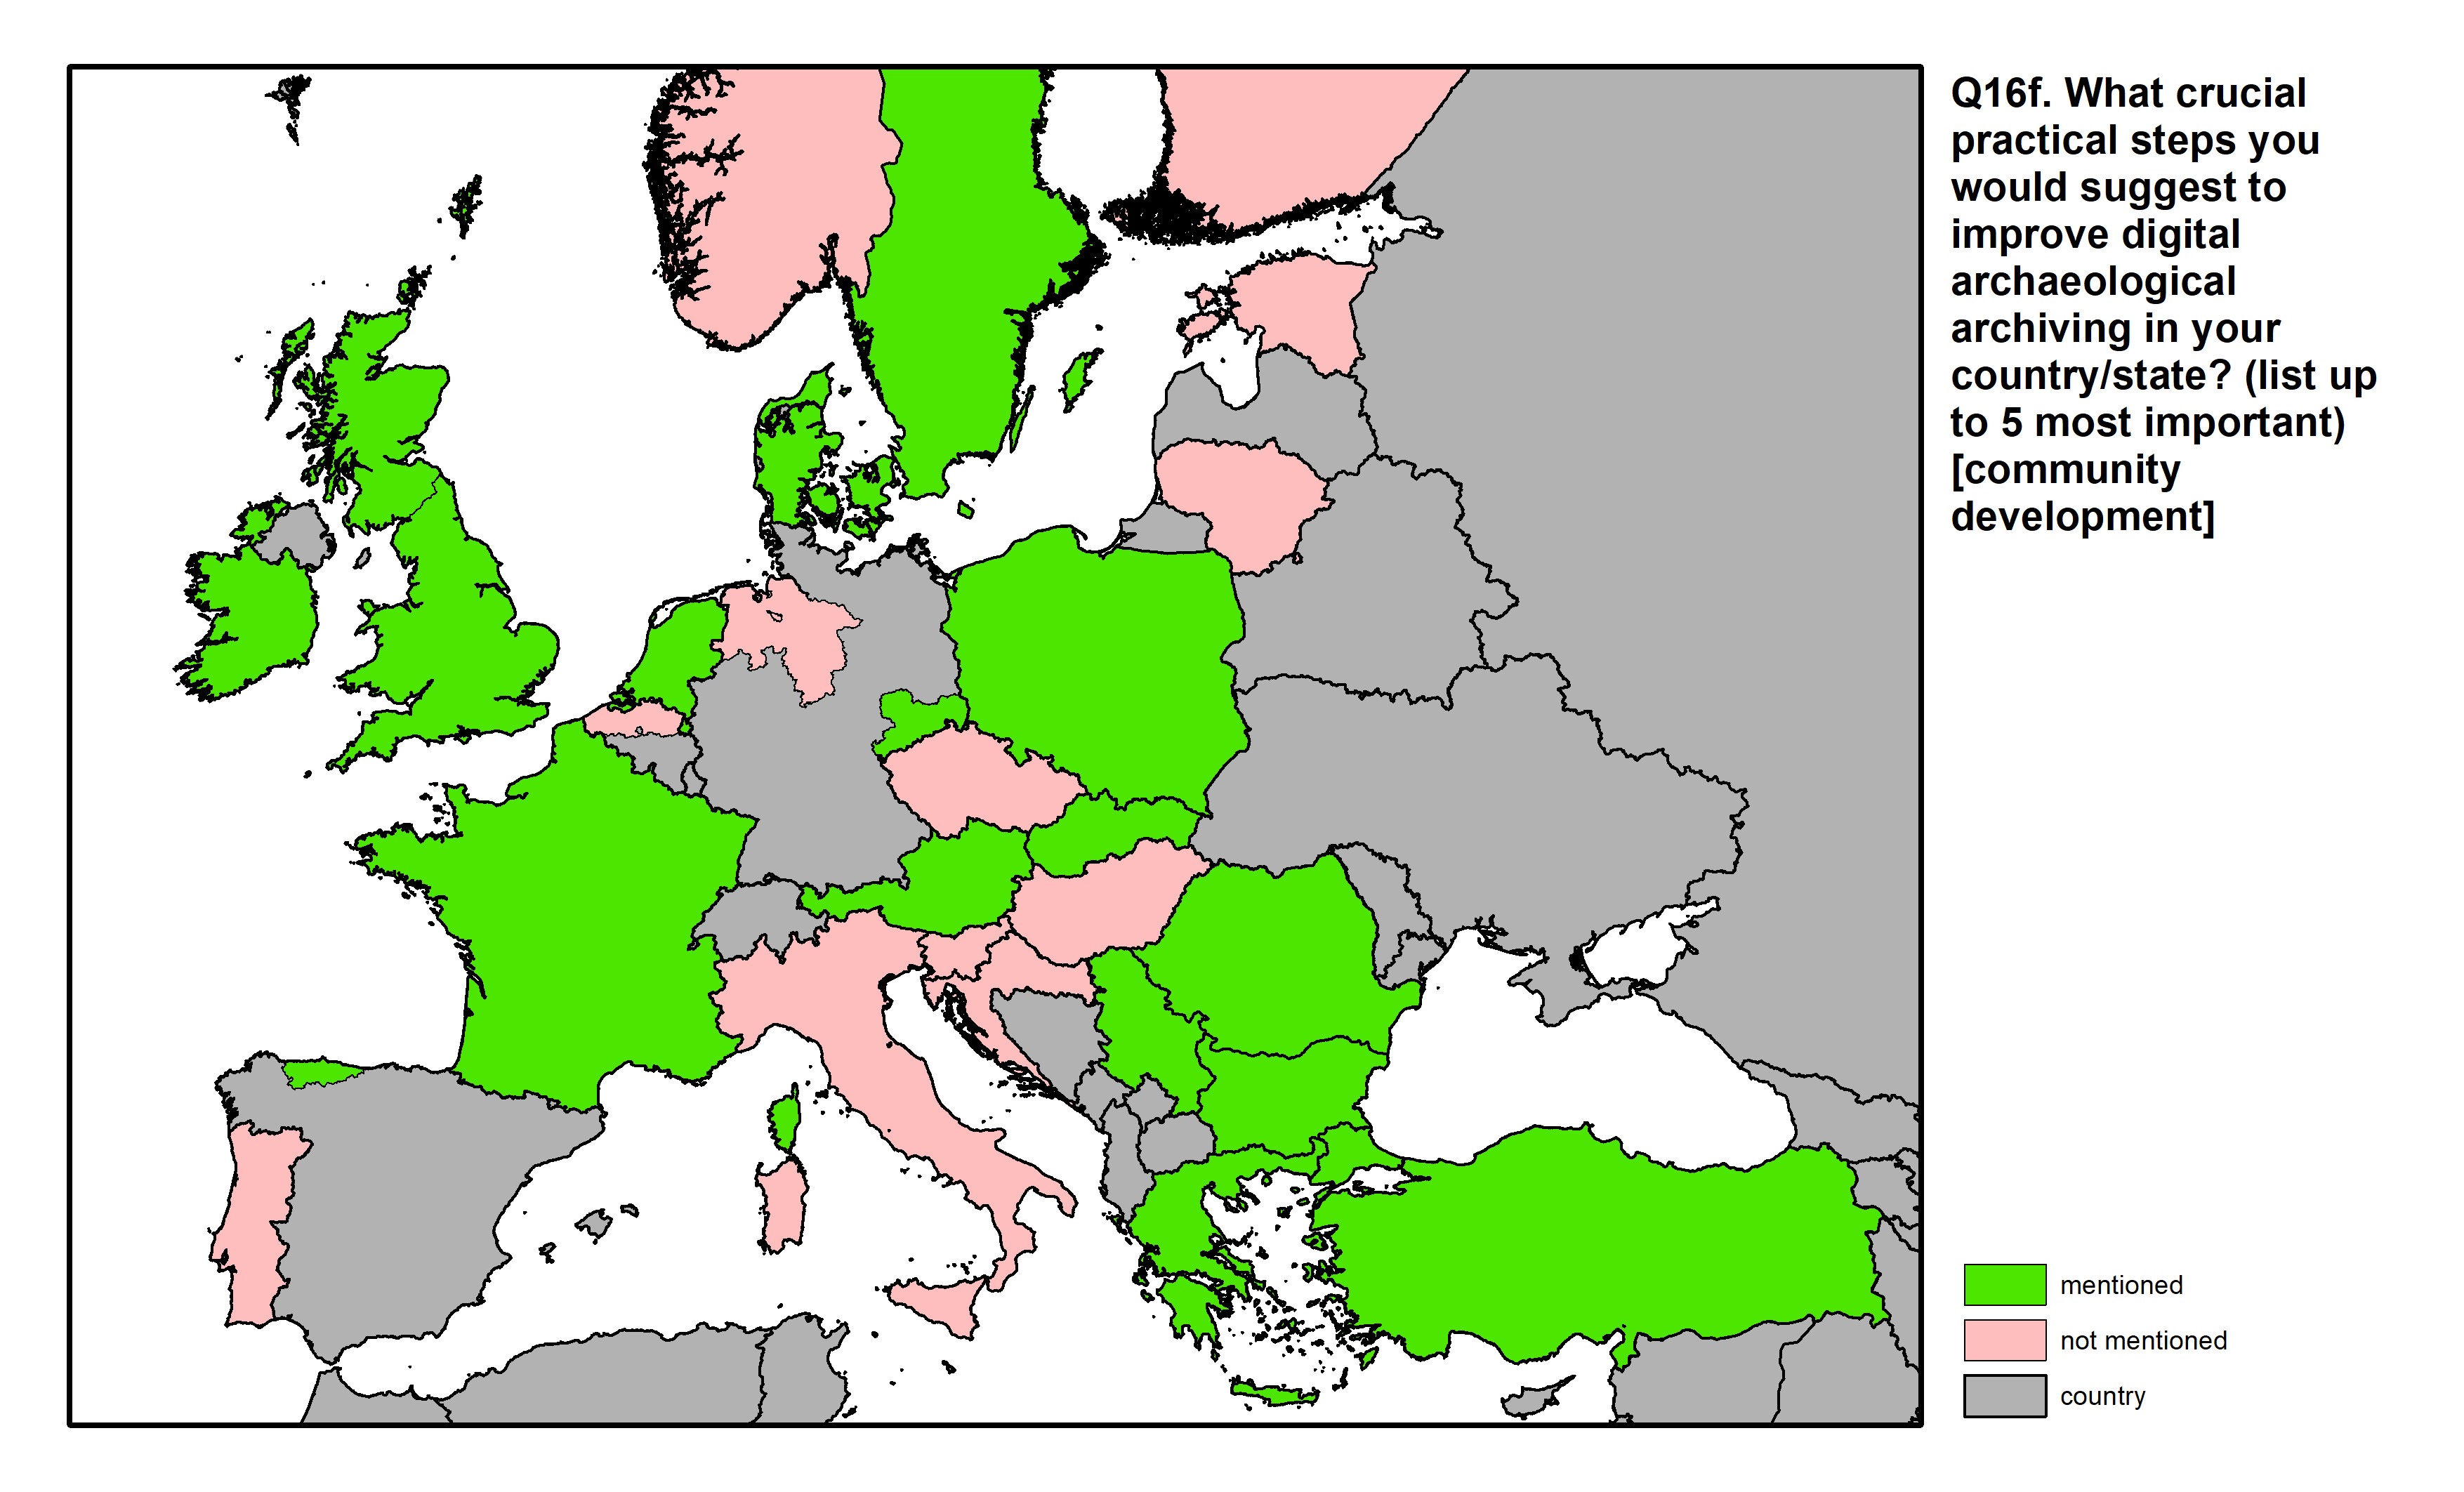 Figure 61: a map of Europe showing countries and regions in colour based on response rates to the survey question.